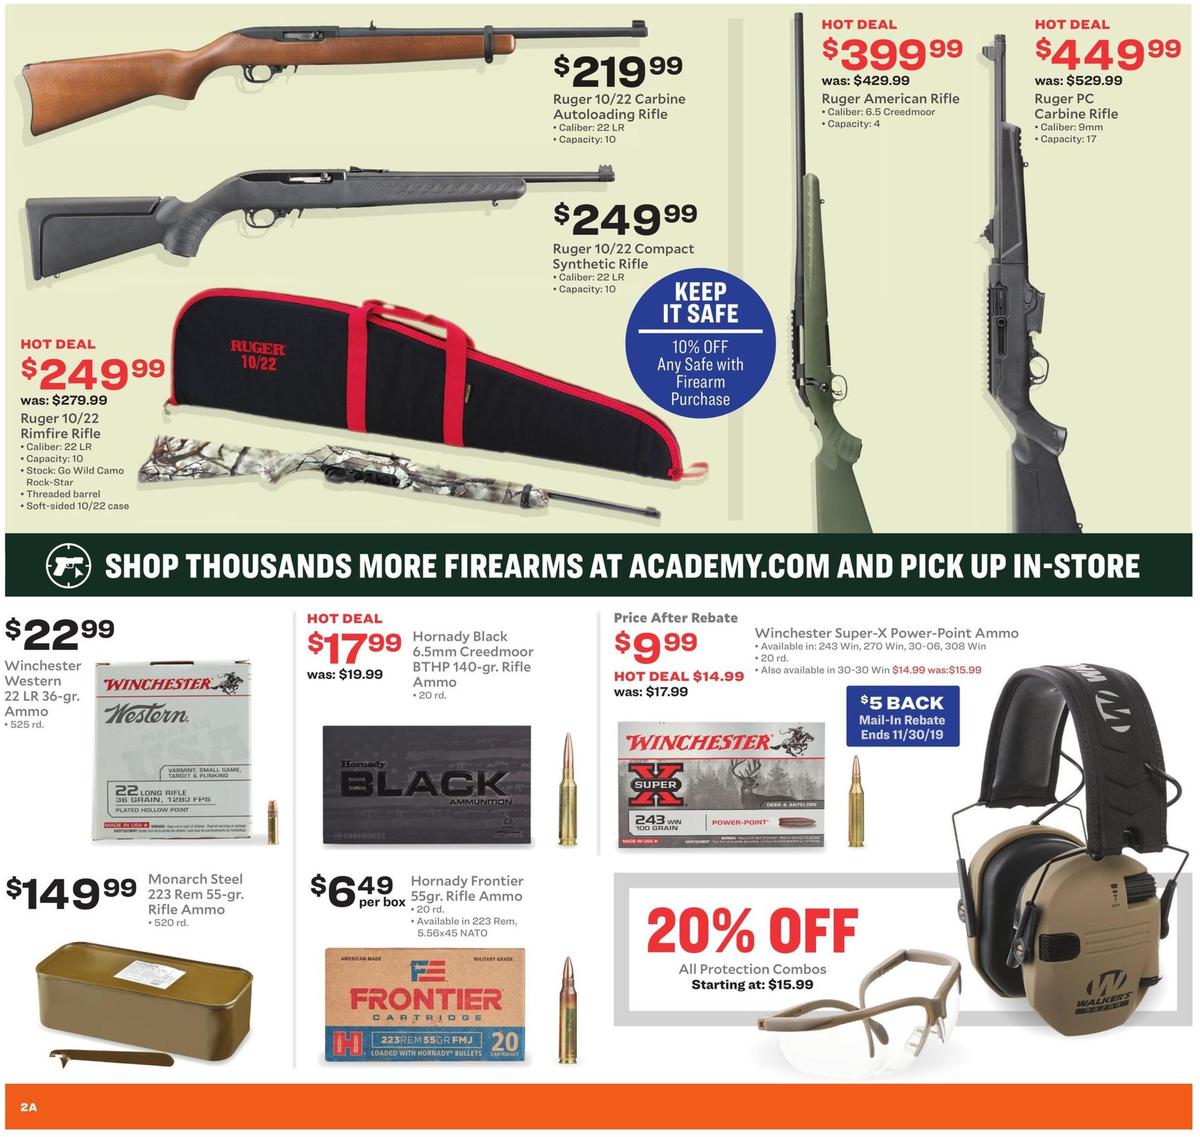 Academy Sports + Outdoors Gear Up for the Hunt Weekly Ad from August 4